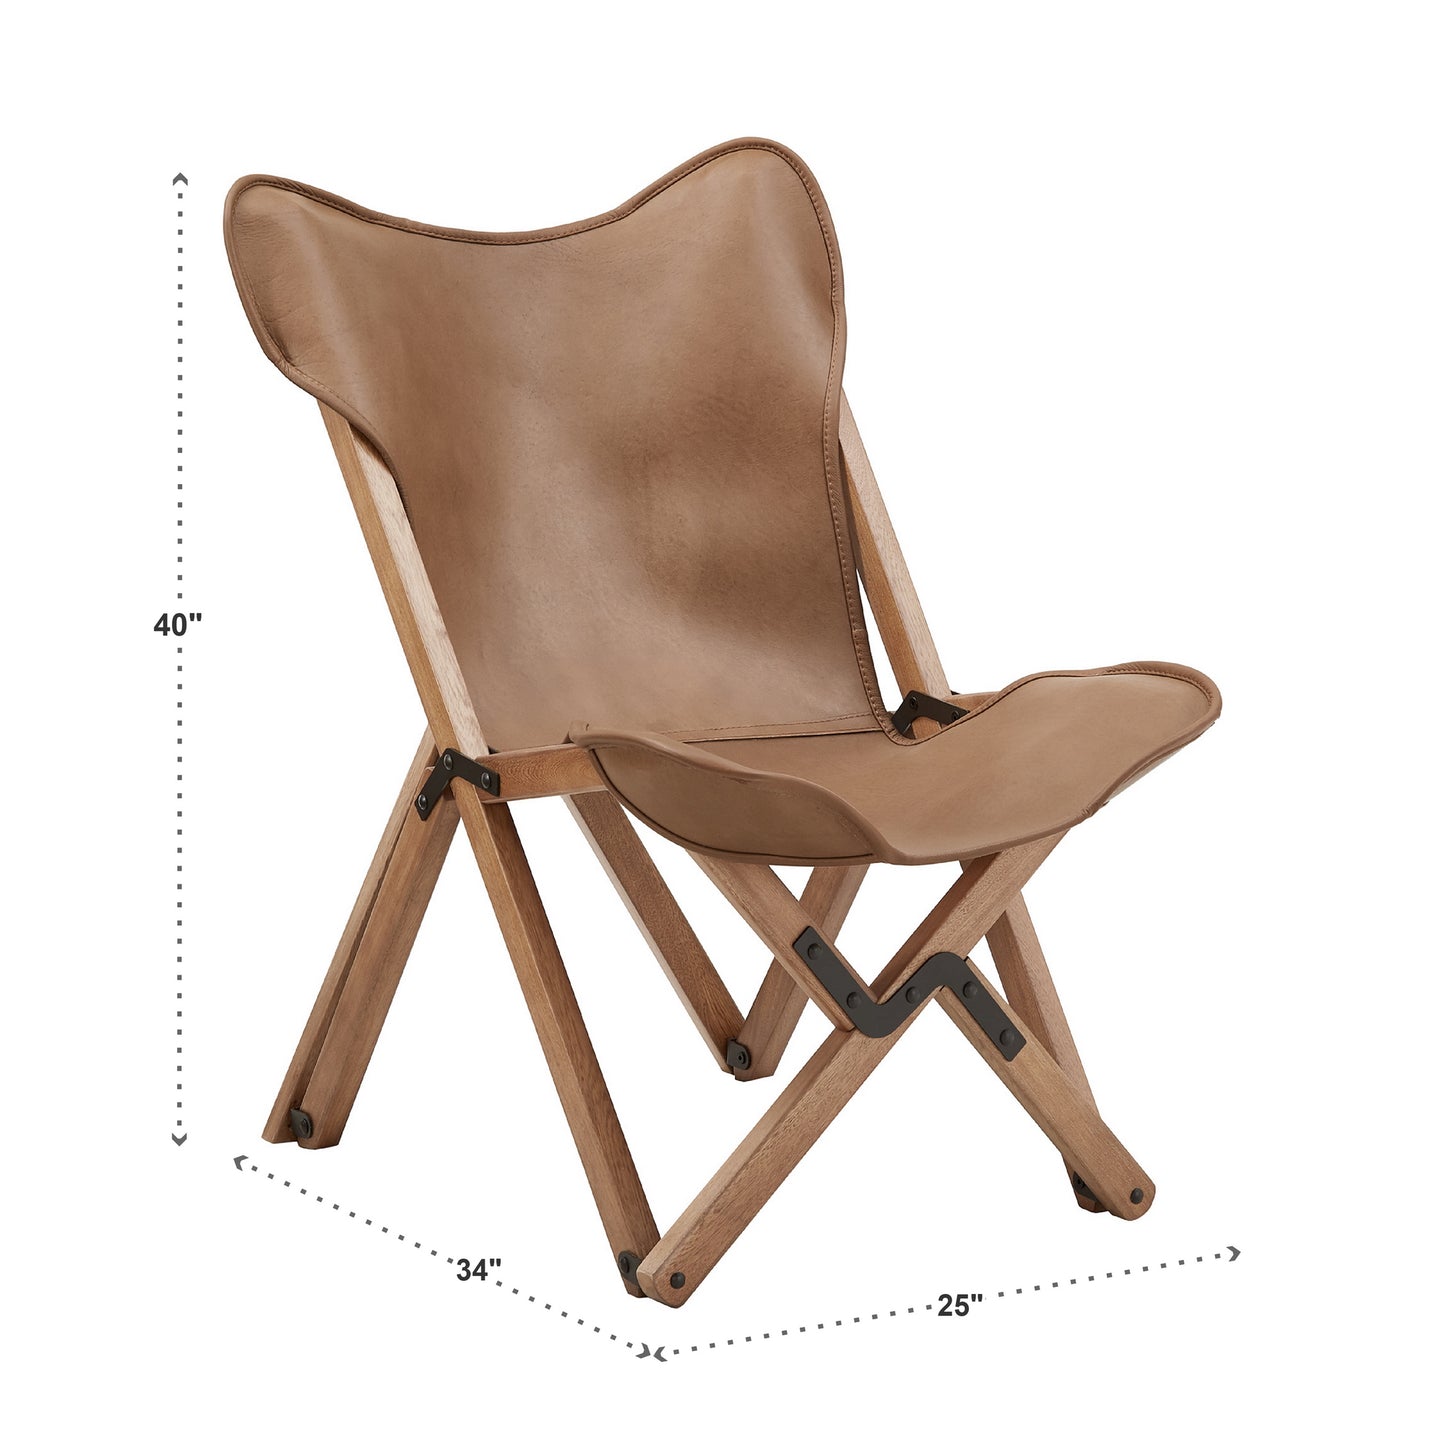 Genuine Top Grain Leather Tripolina Sling Chair - Maple Finish Frame, Caramel Leather